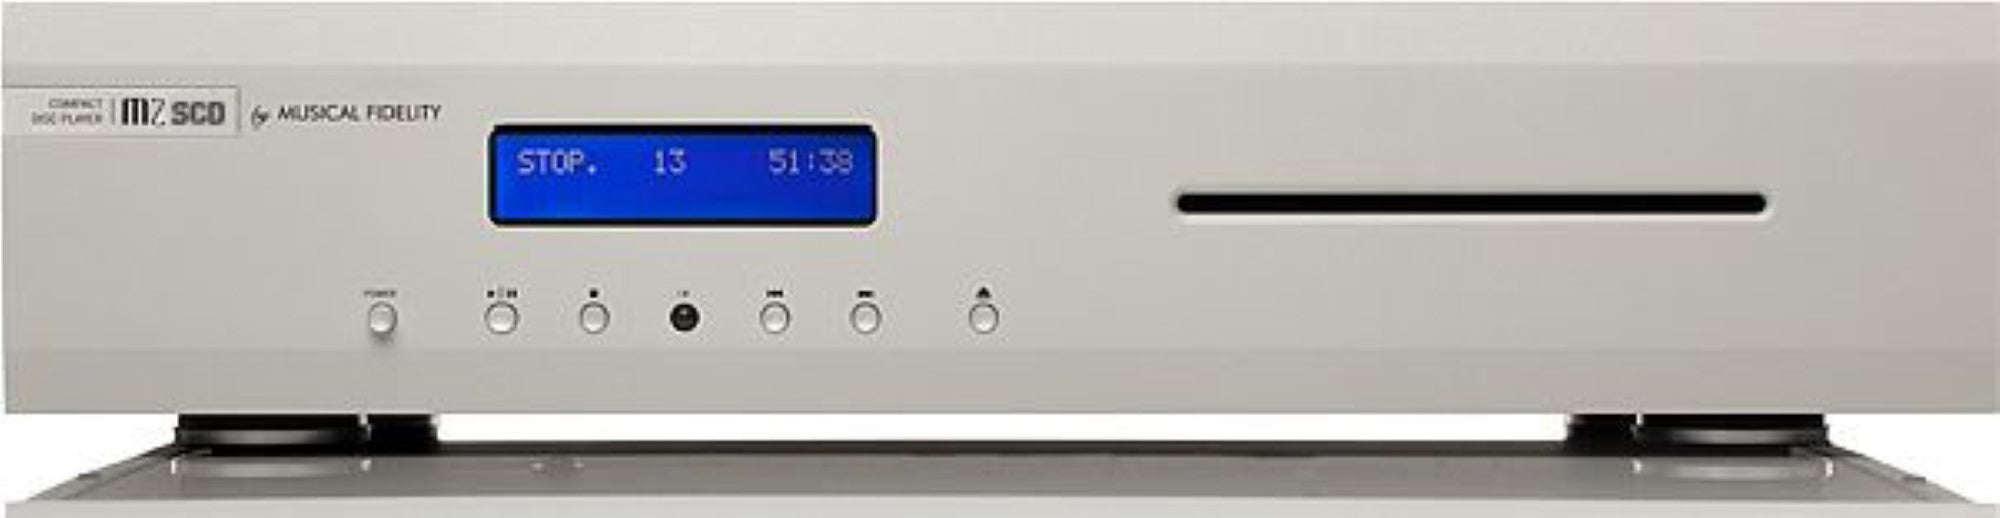 Musical Fidelity M2SCD CD Player - Safe and Sound HQ